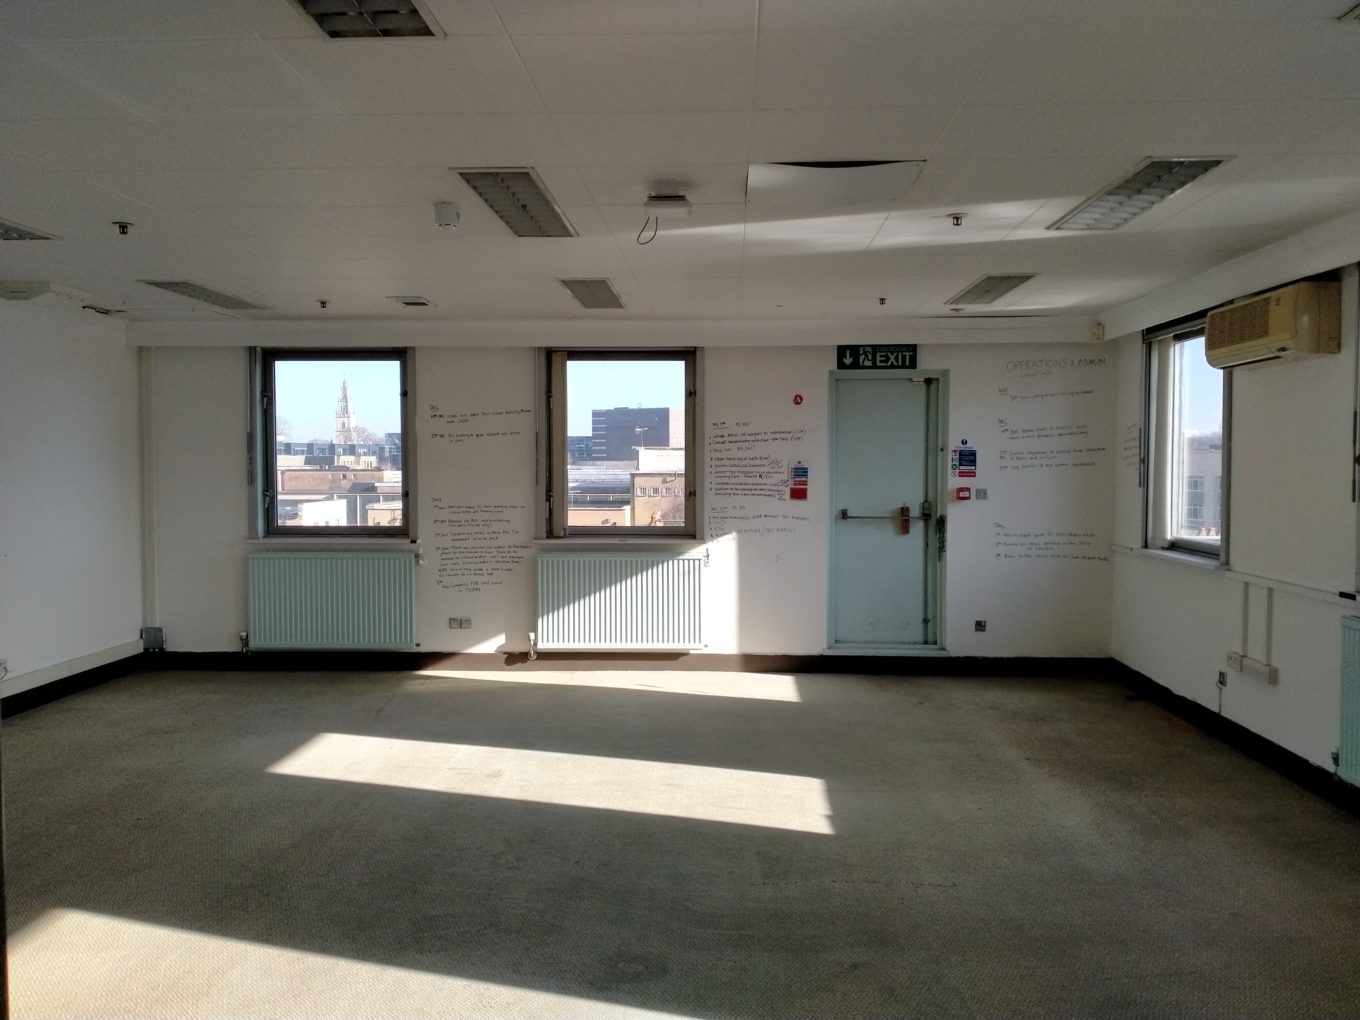 A large empty room with views over a city